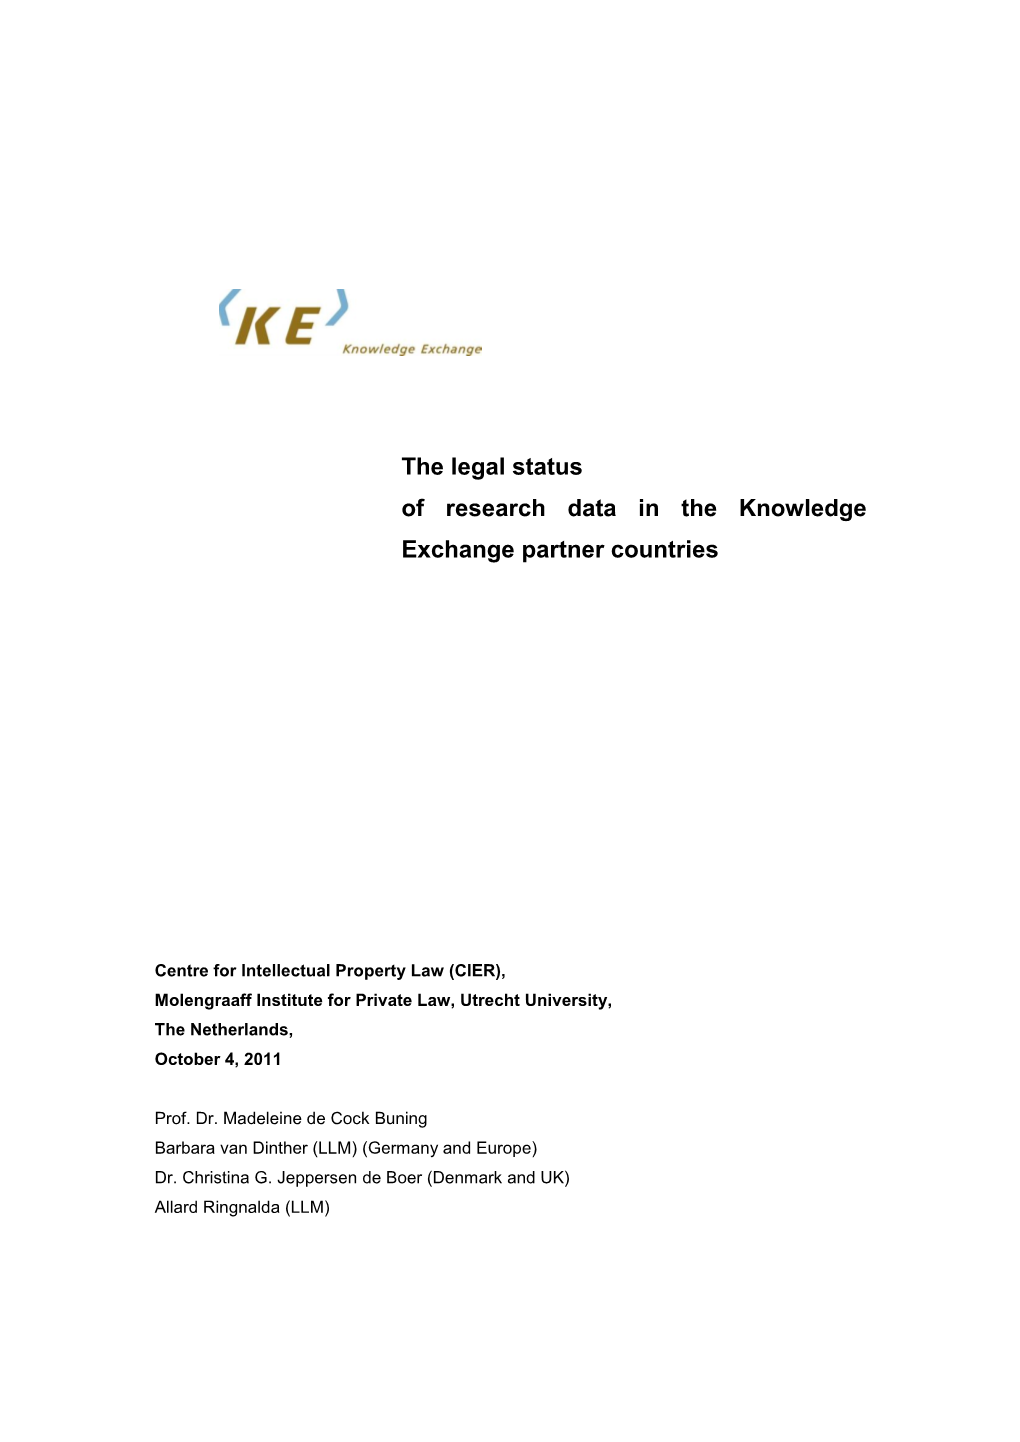 The Legal Status of Research Data in the Knowledge Exchange Partner Countries